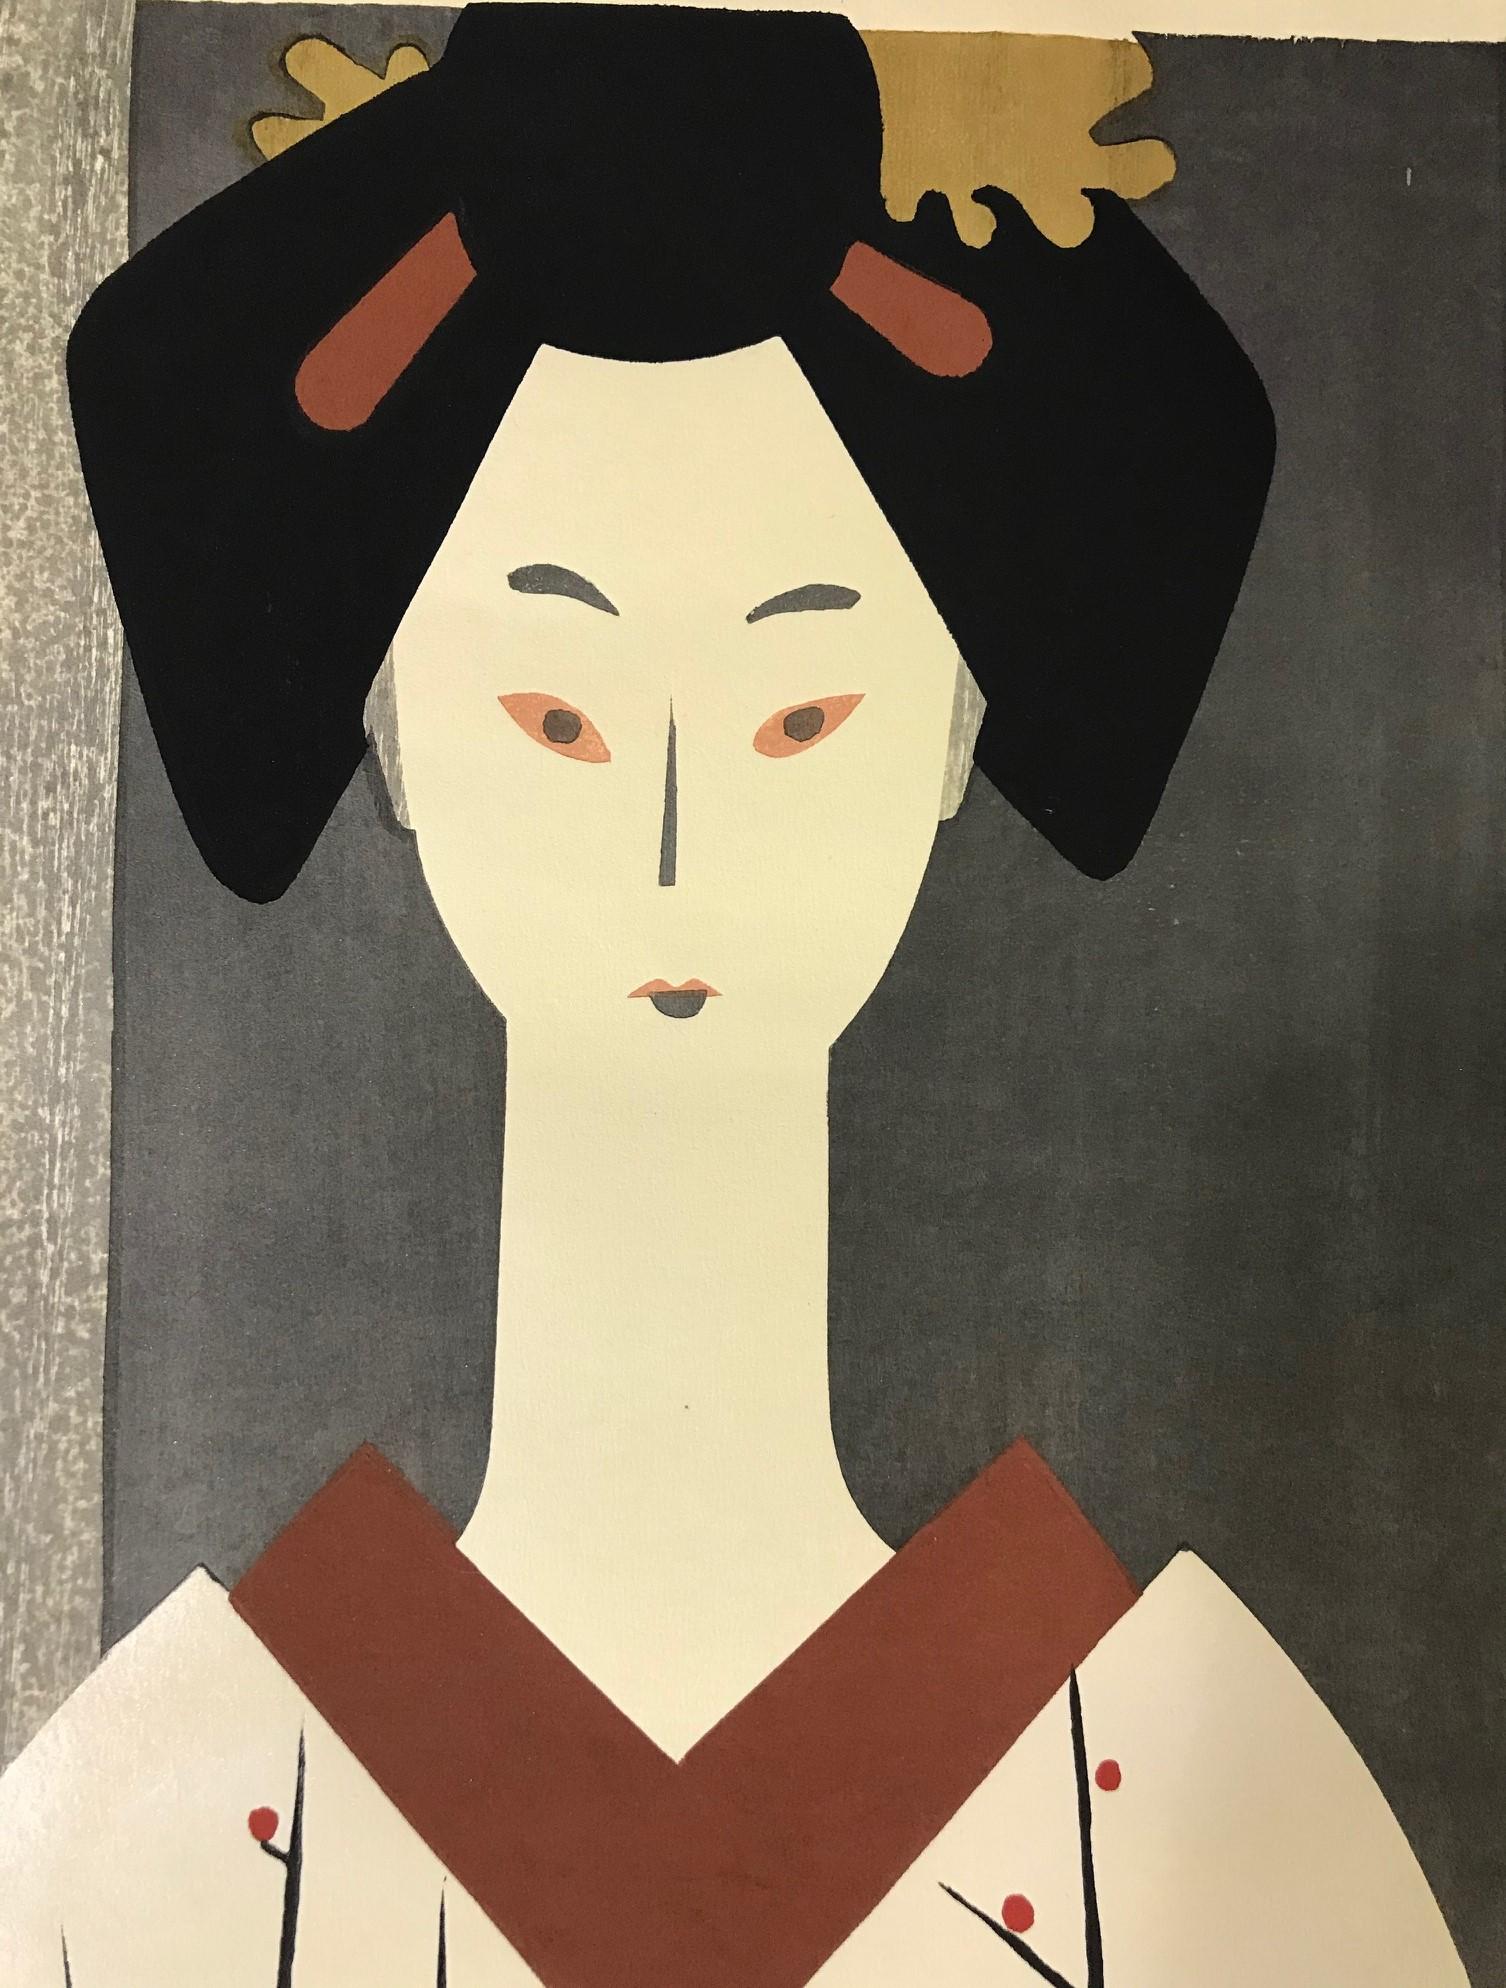 A beautifully composed, rare woodblock print by famed Japanese printmaker Kiyoshi Saito. Many consider Saito to be one of the most important, if not the most important, contemporary Japanese printmakers of the 20th century. This print of a serene